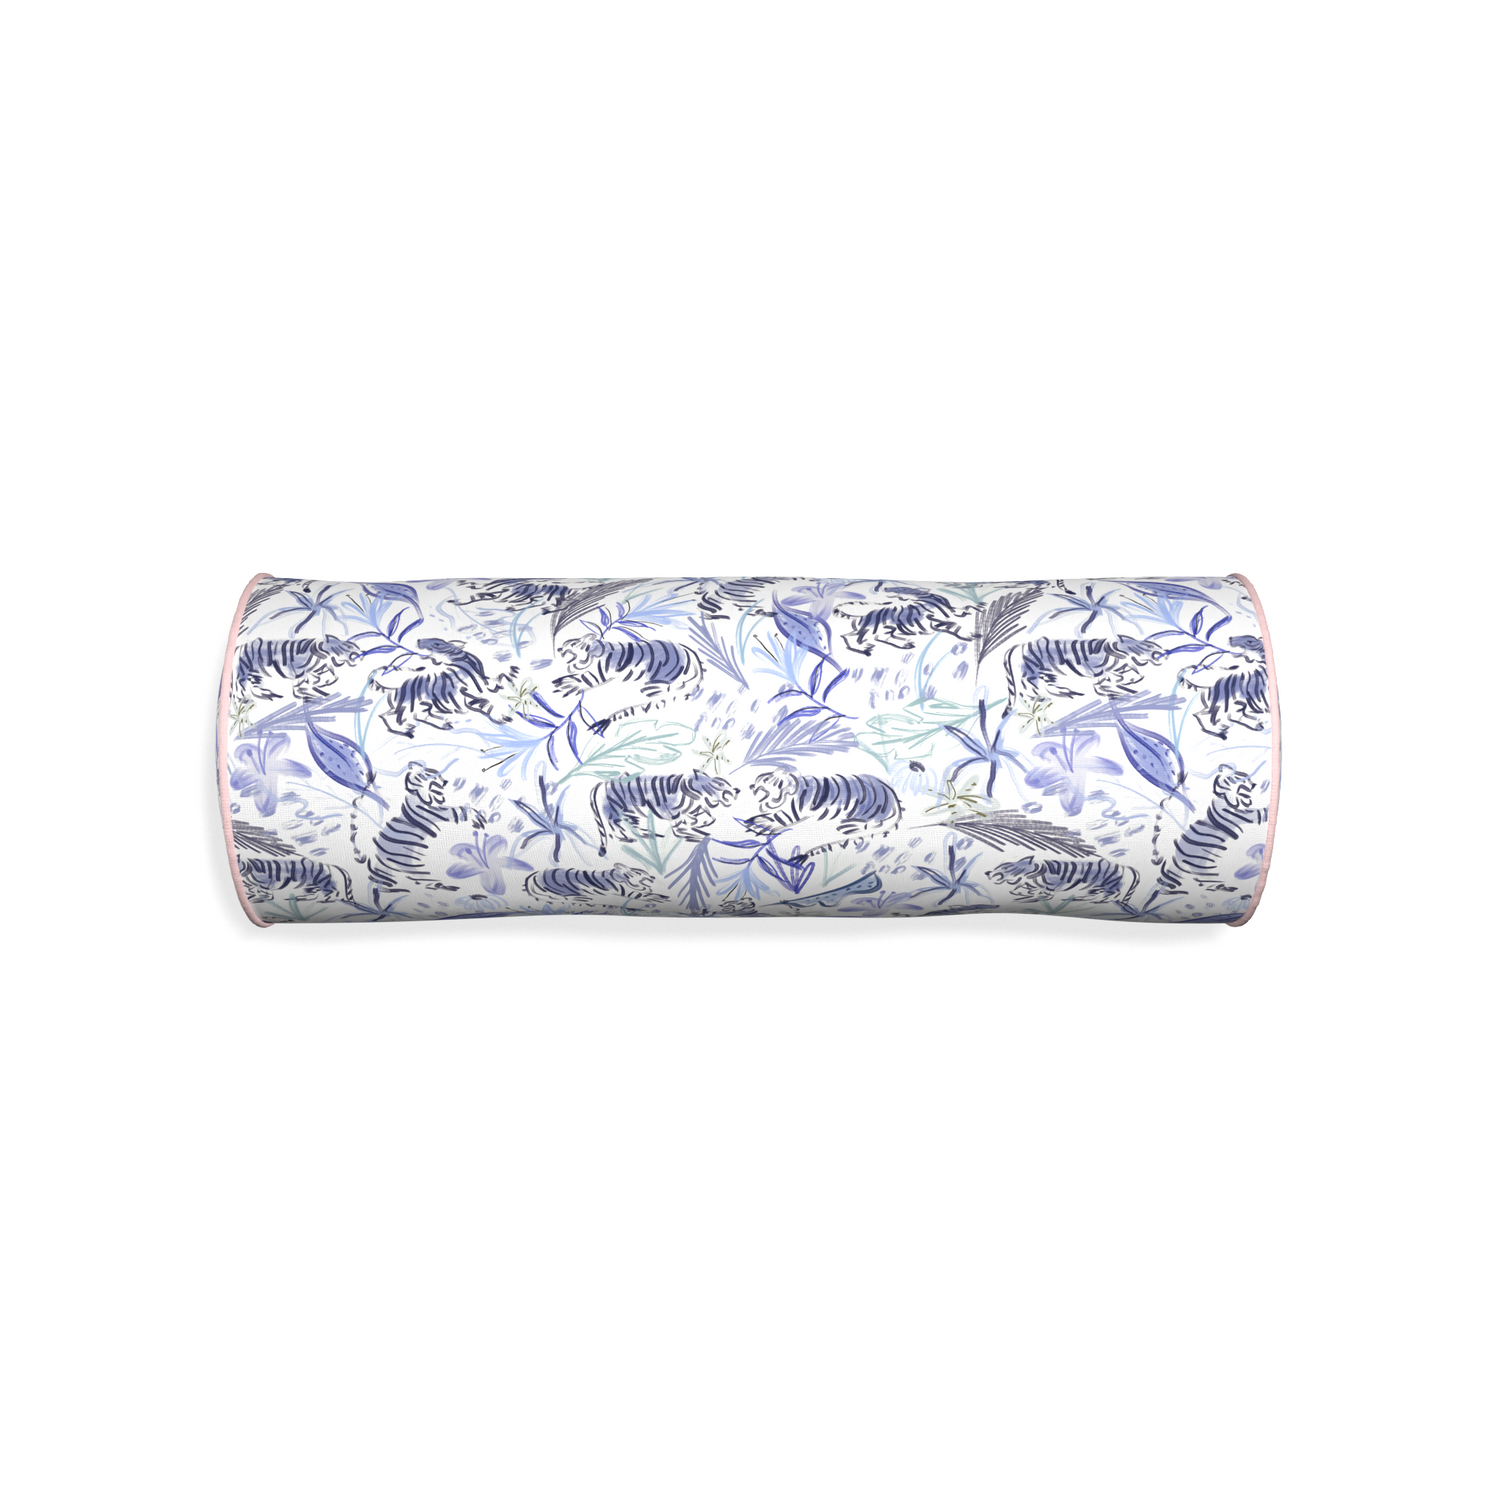 Bolster frida blue custom blue with intricate tiger designpillow with petal piping on white background